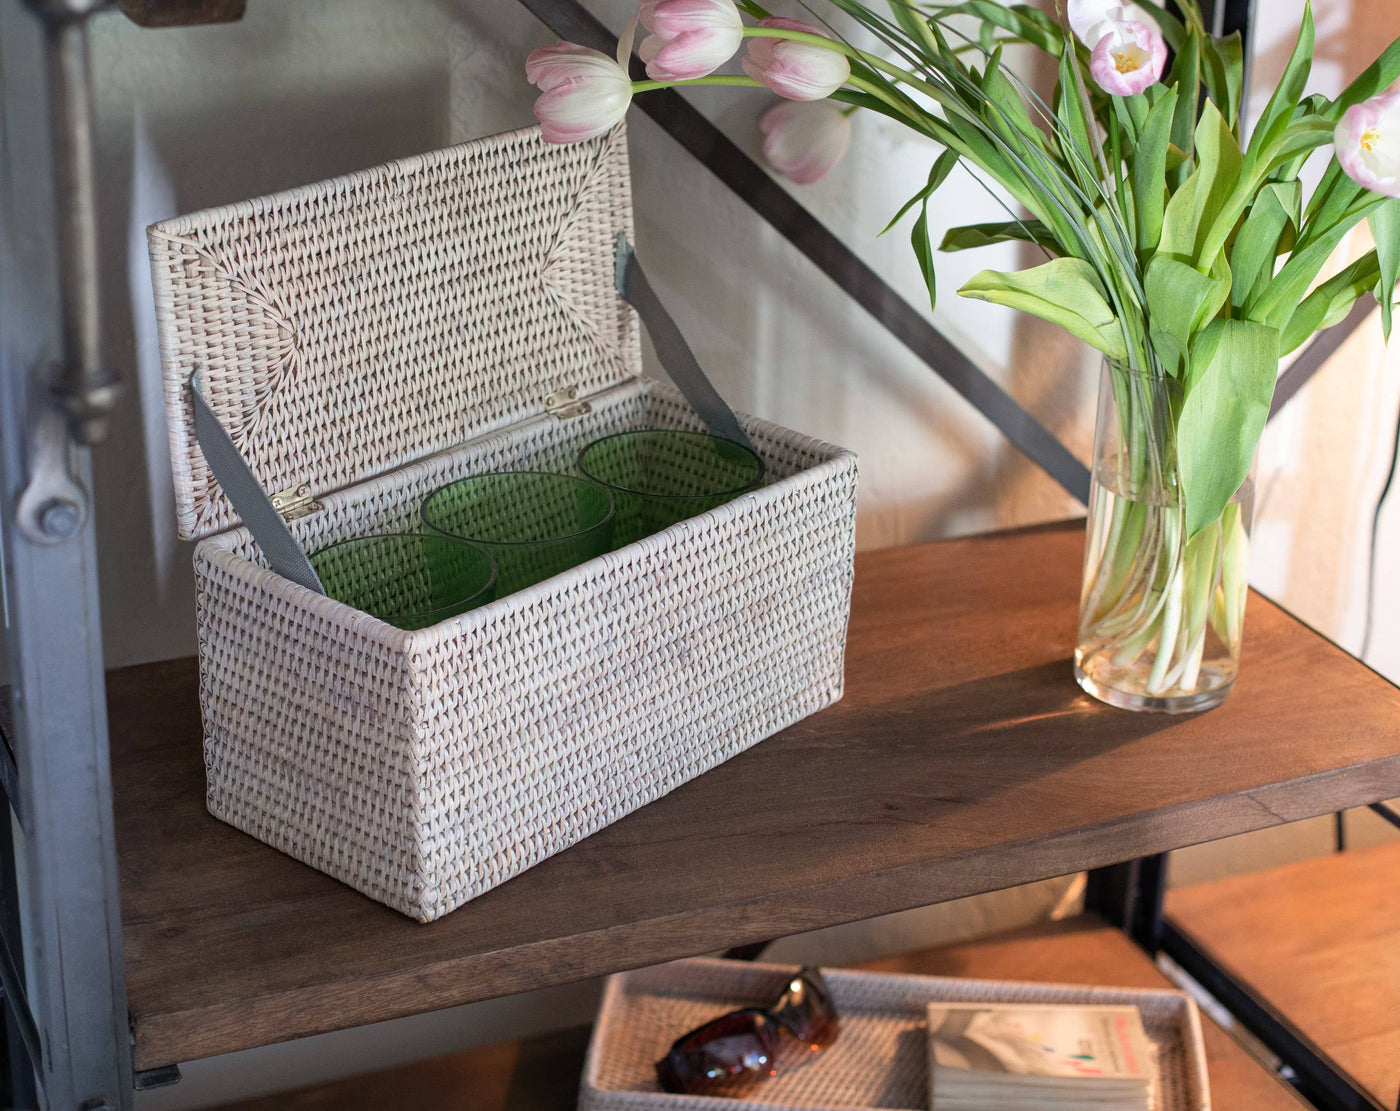 Rattan Rectangular Double Tissue Roll Box with Lid